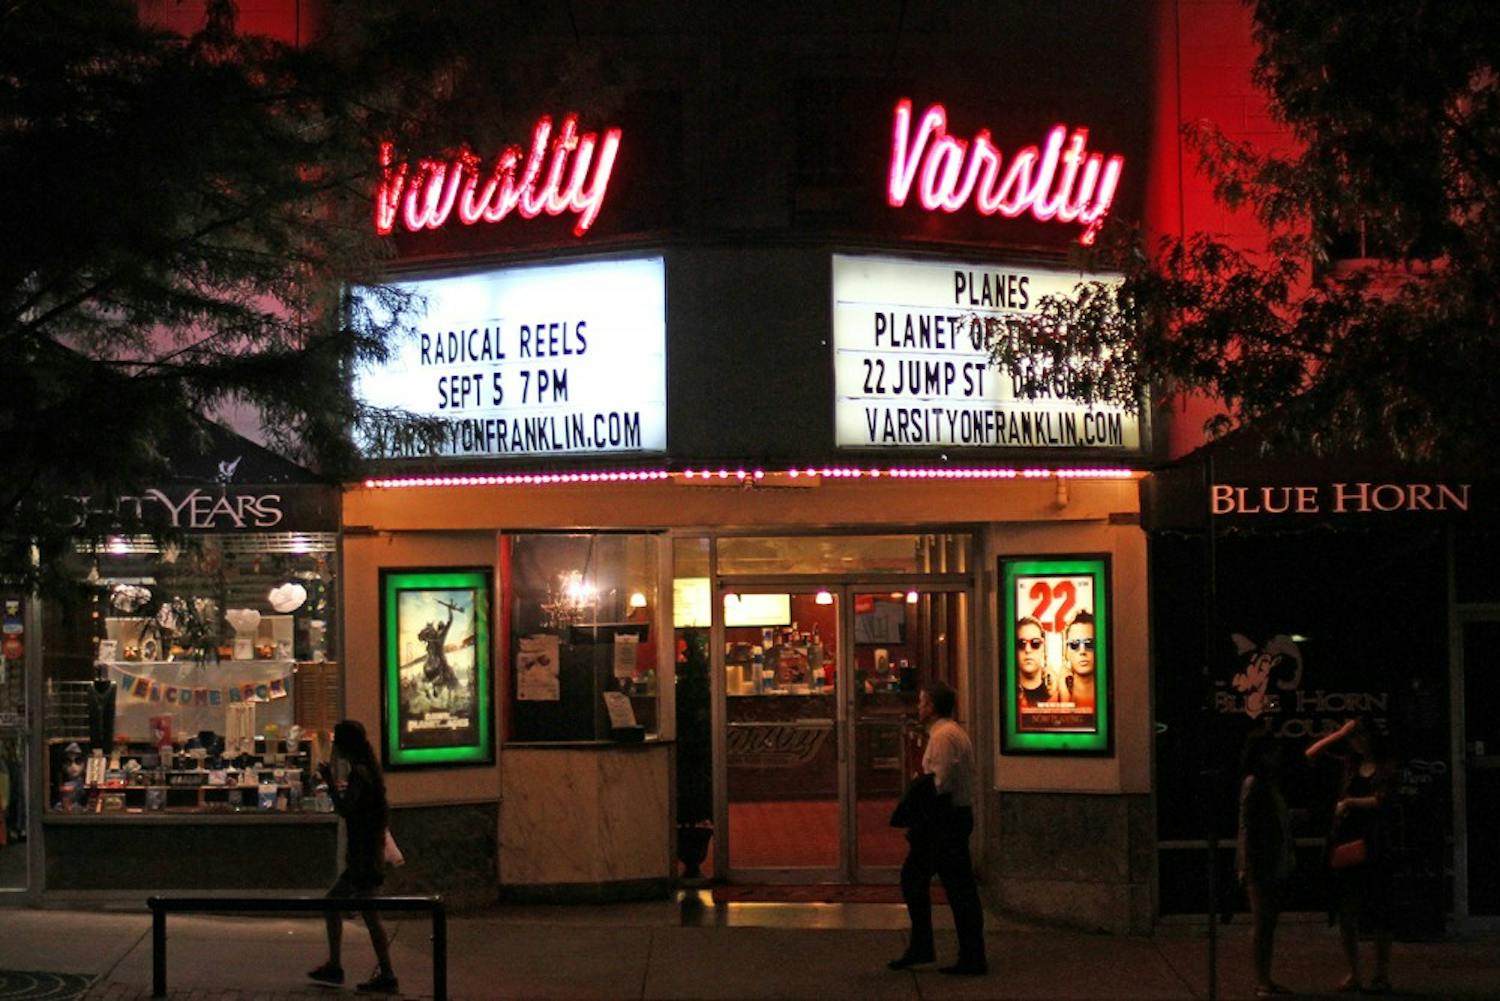 The Banff Mountain Film Festival’s Radical Reels Tour arrives at the Varsity Theatre tonight.